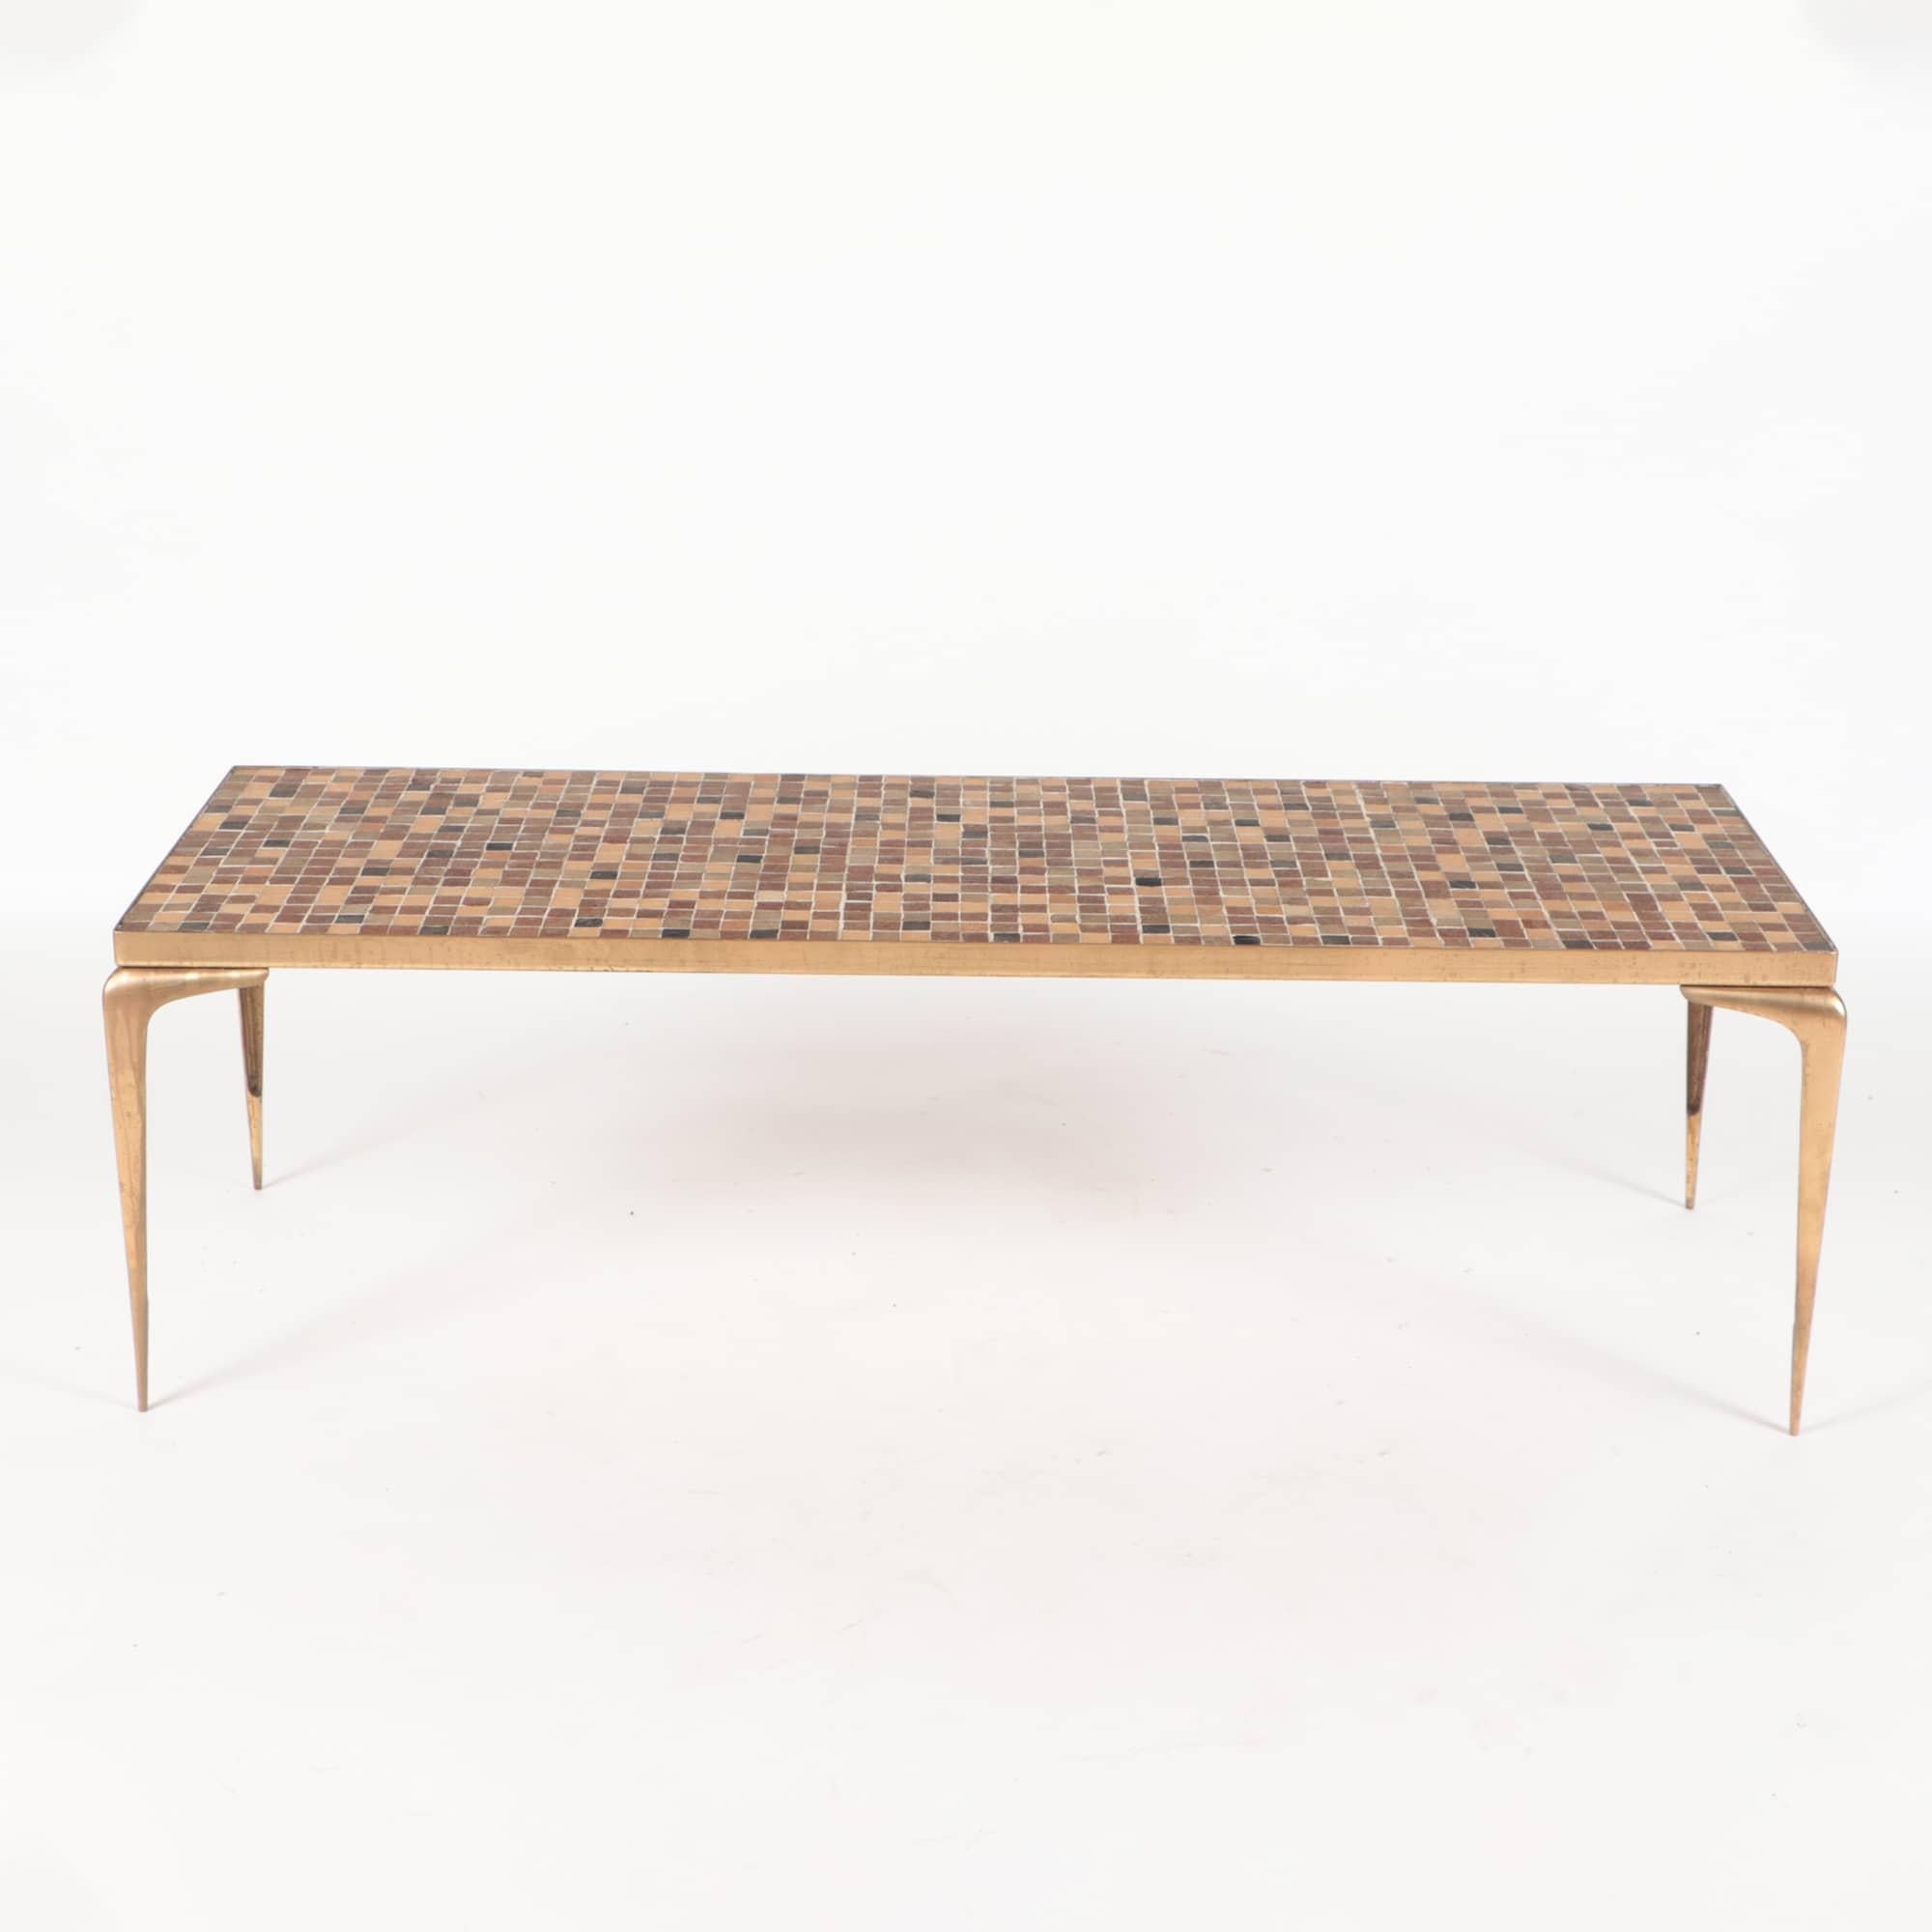 A very stylish Mid-Century Modern Italian coffee table with brass legs and top made of mosaic of neutral toned Italian glass tiles circa 1960.